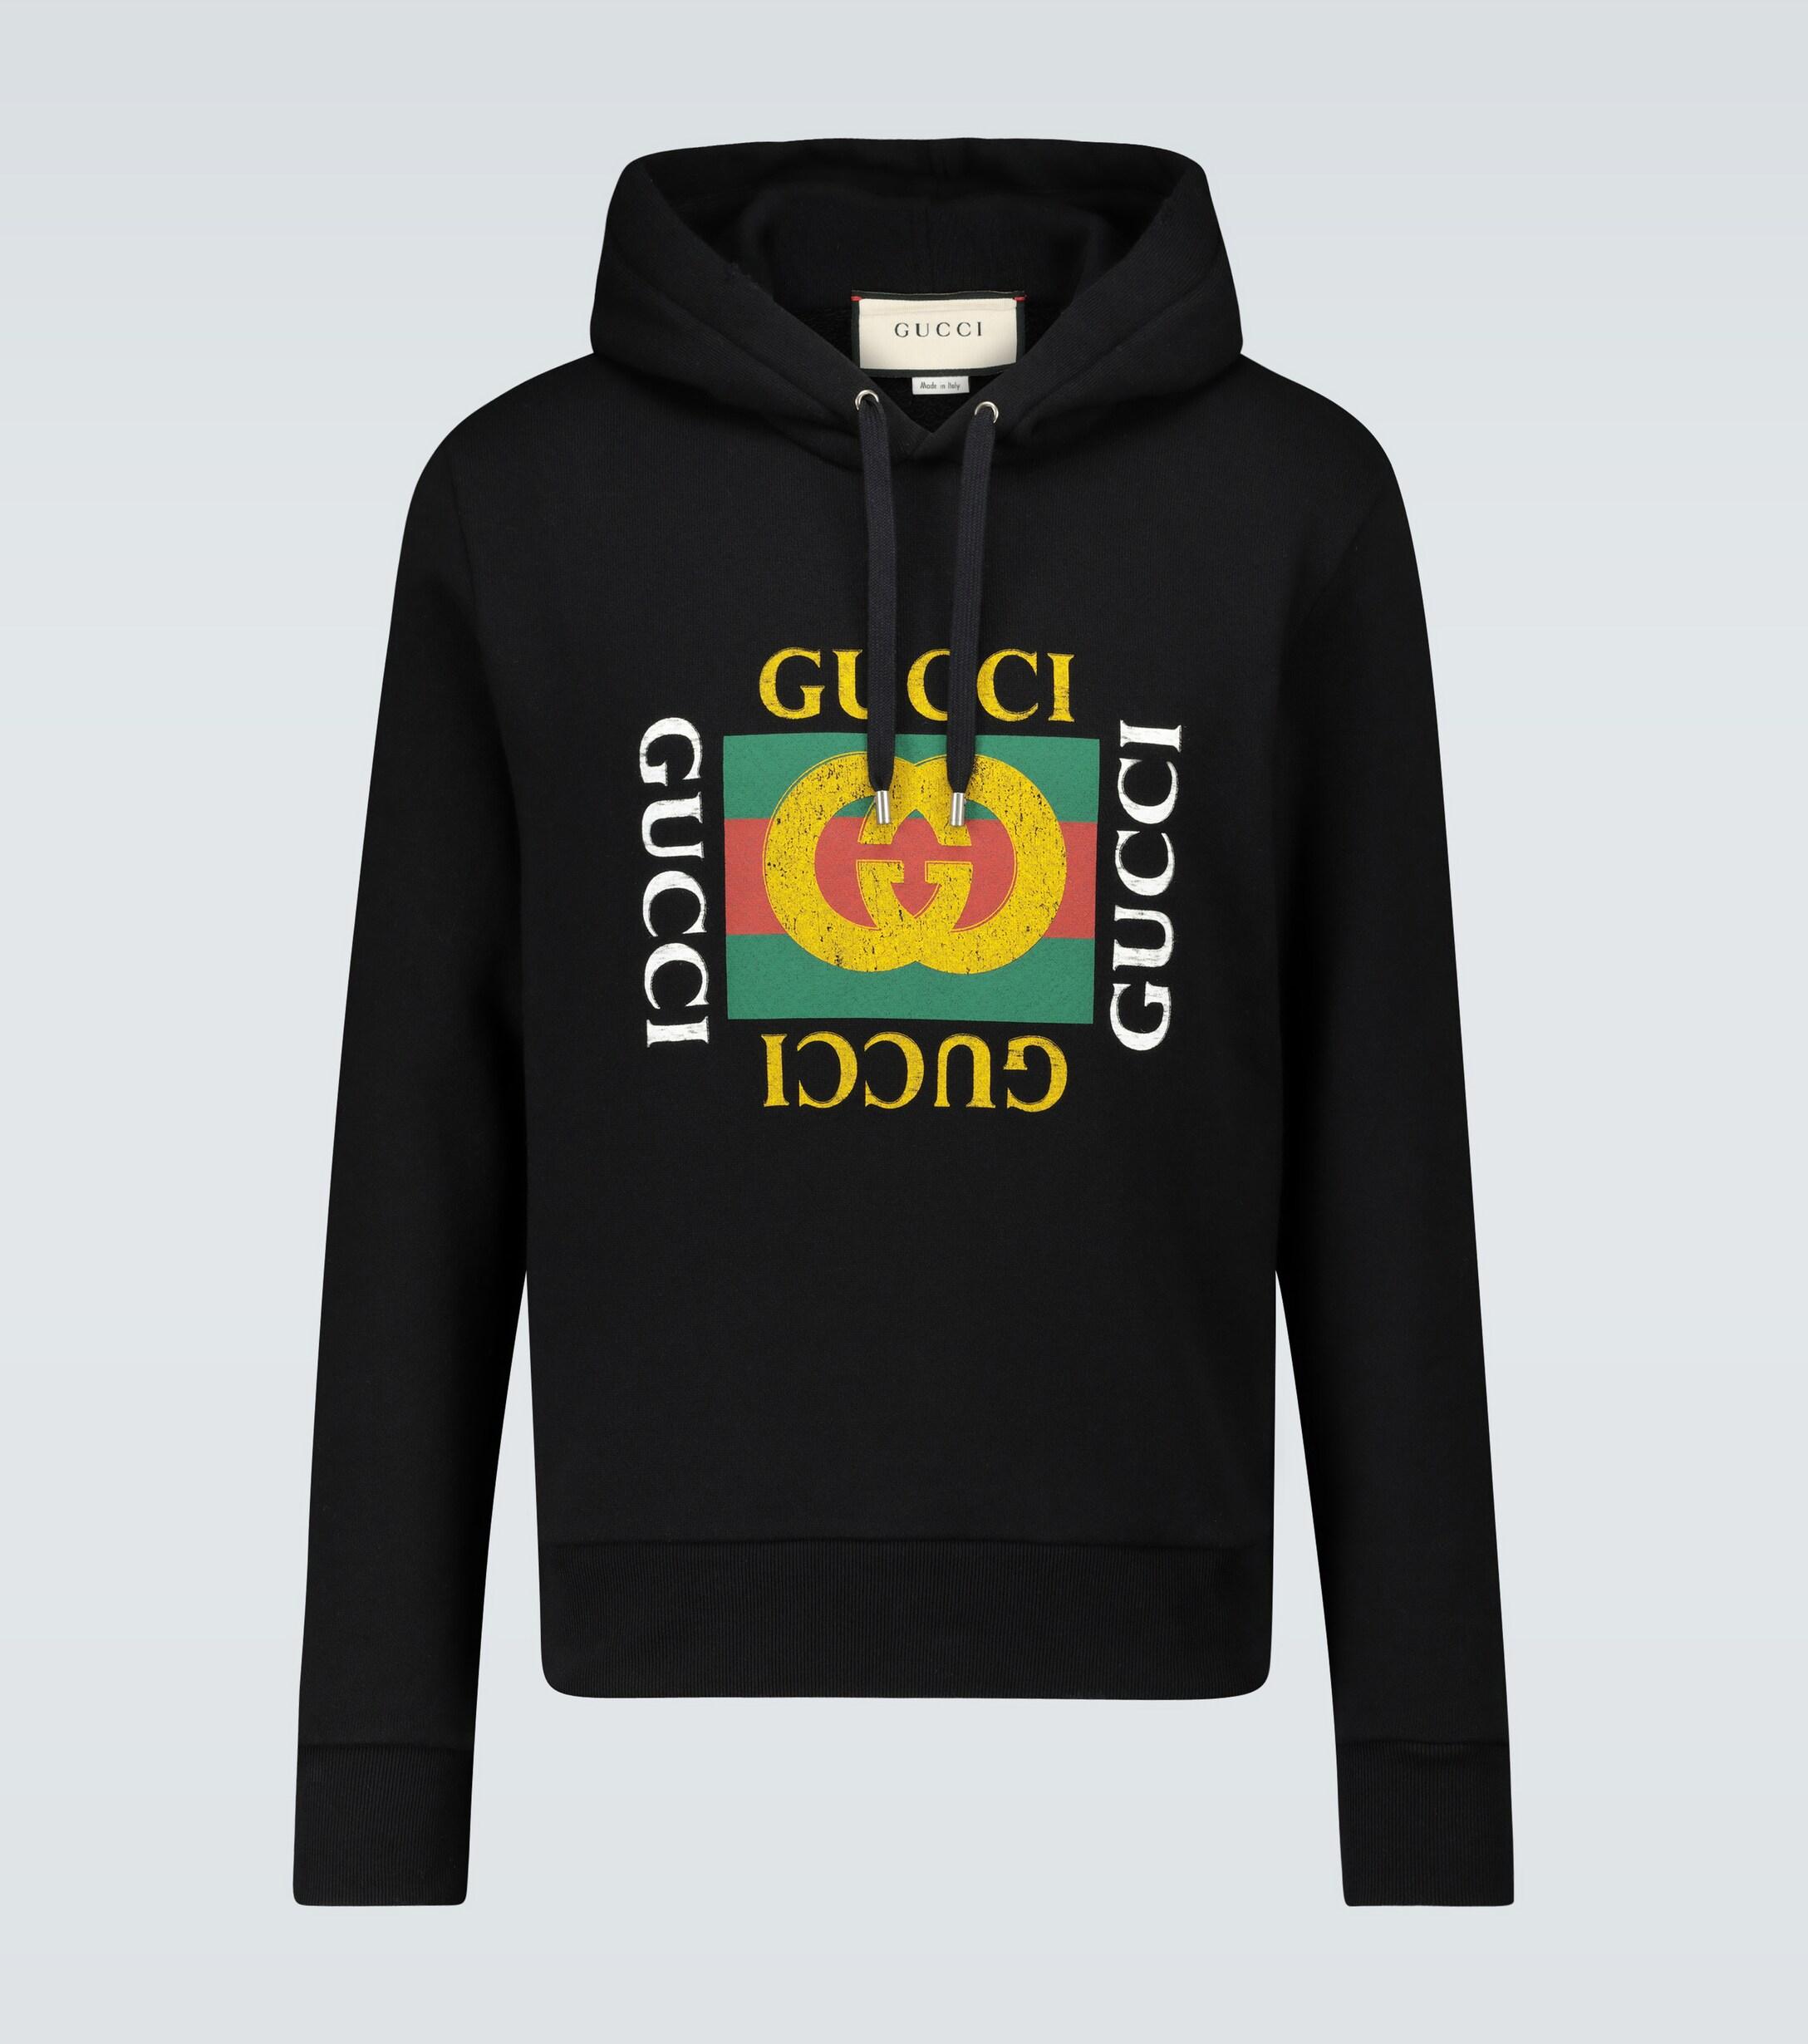 Gucci Cotton Fake Logo Hoodie in Black for Men - Save 30% - Lyst